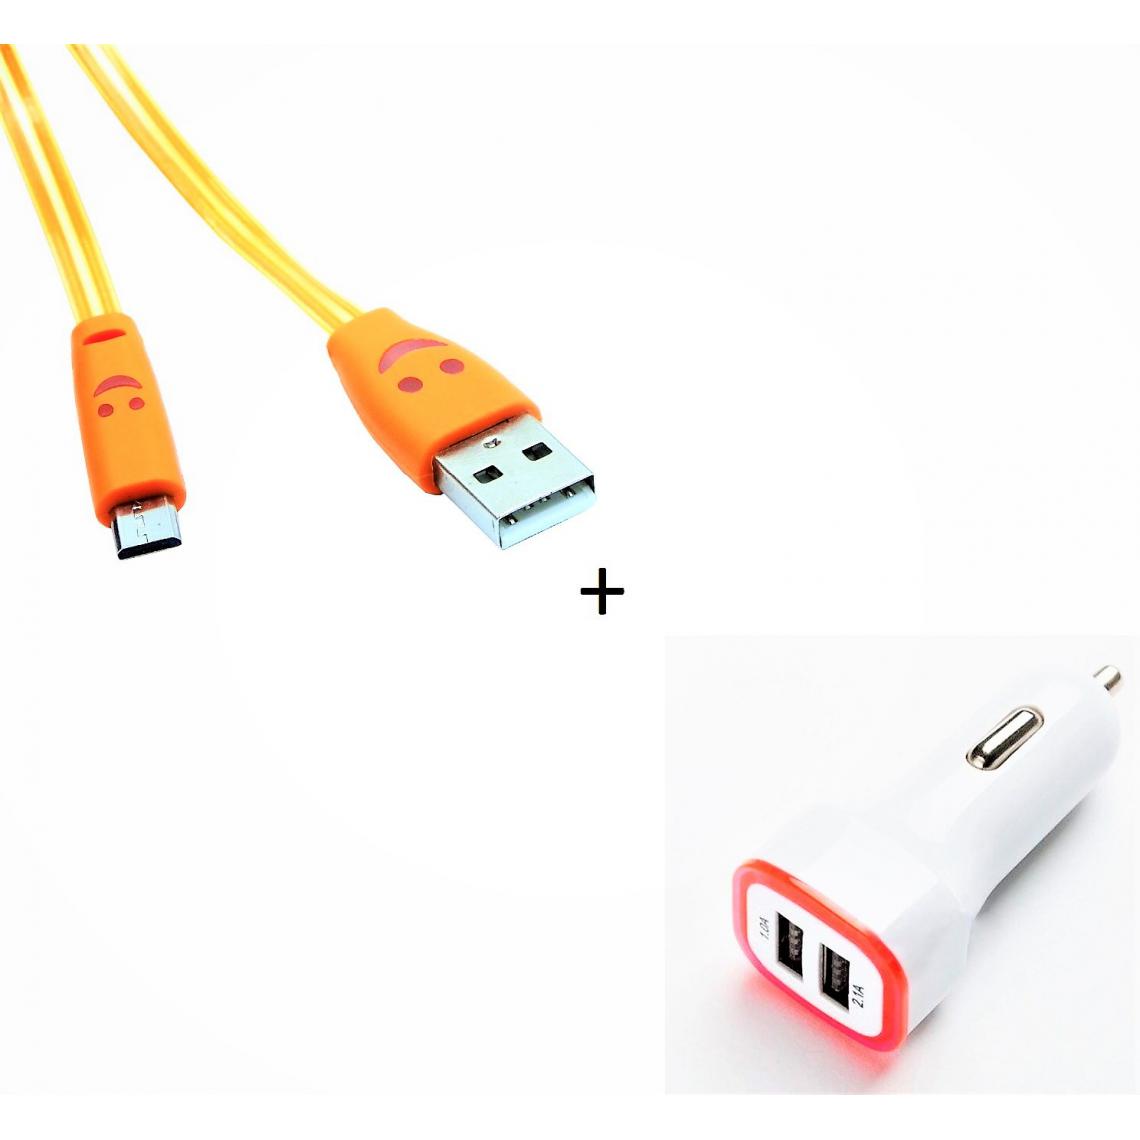 Shot - Pack Chargeur Voiture pour HUAWEI Y5 2019 Smartphone Micro USB (Cable Smiley + Double Adaptateur LED Allume Cigare) (ORANGE) - Chargeur Voiture 12V